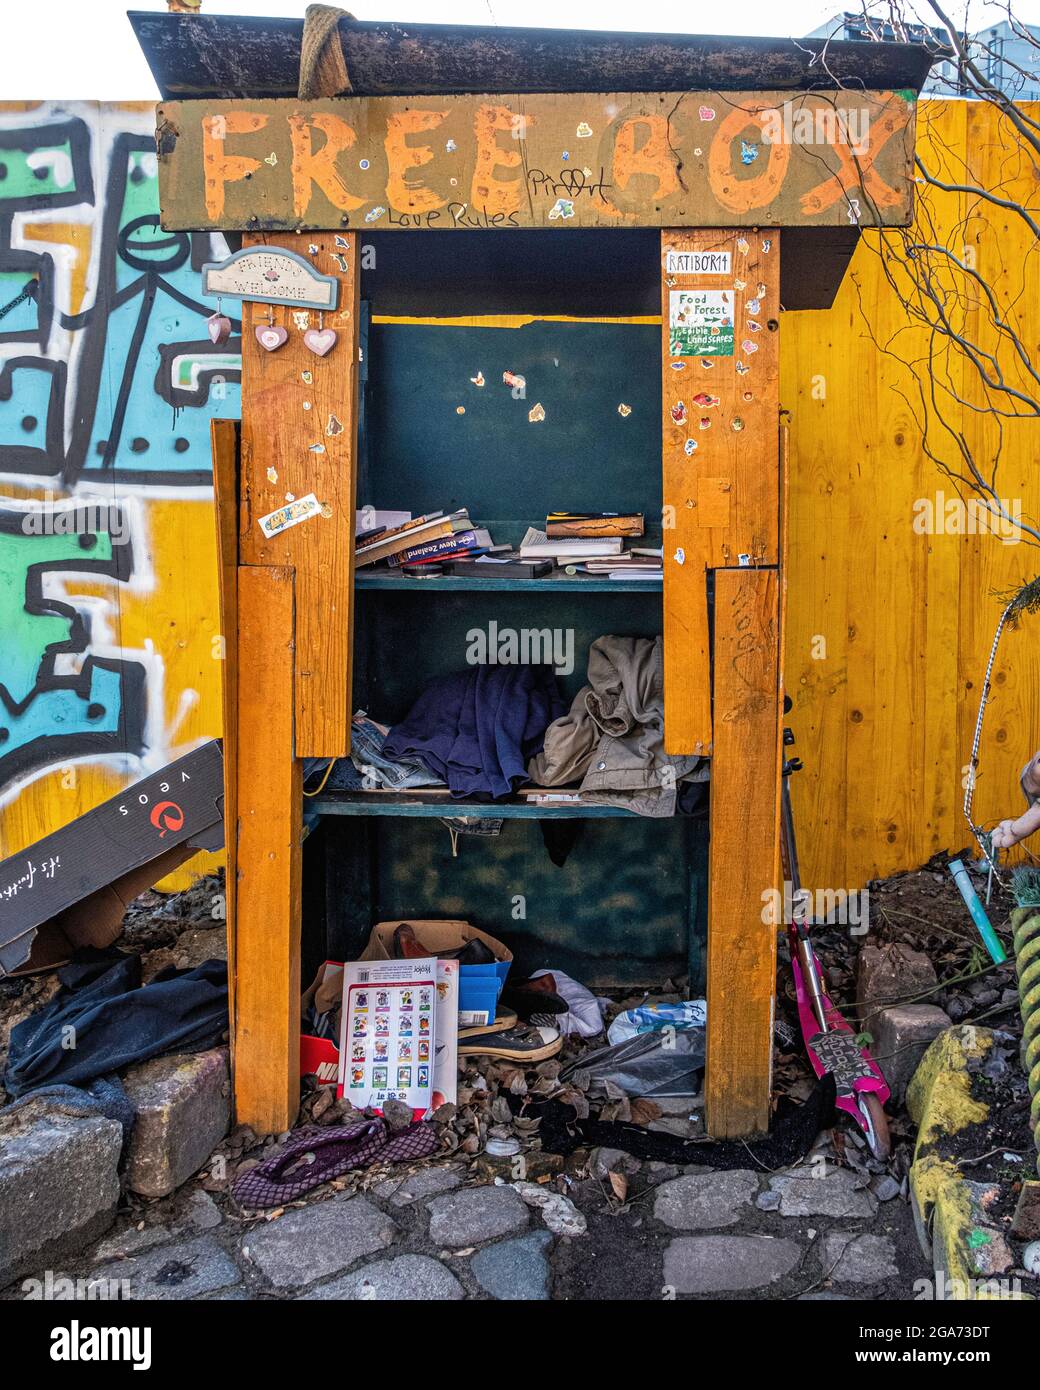 Free box shares clothes, books and toys with residents of  Teepeeland informal squatters commune in Kreuzberg-Berlin, Germany. Stock Photo